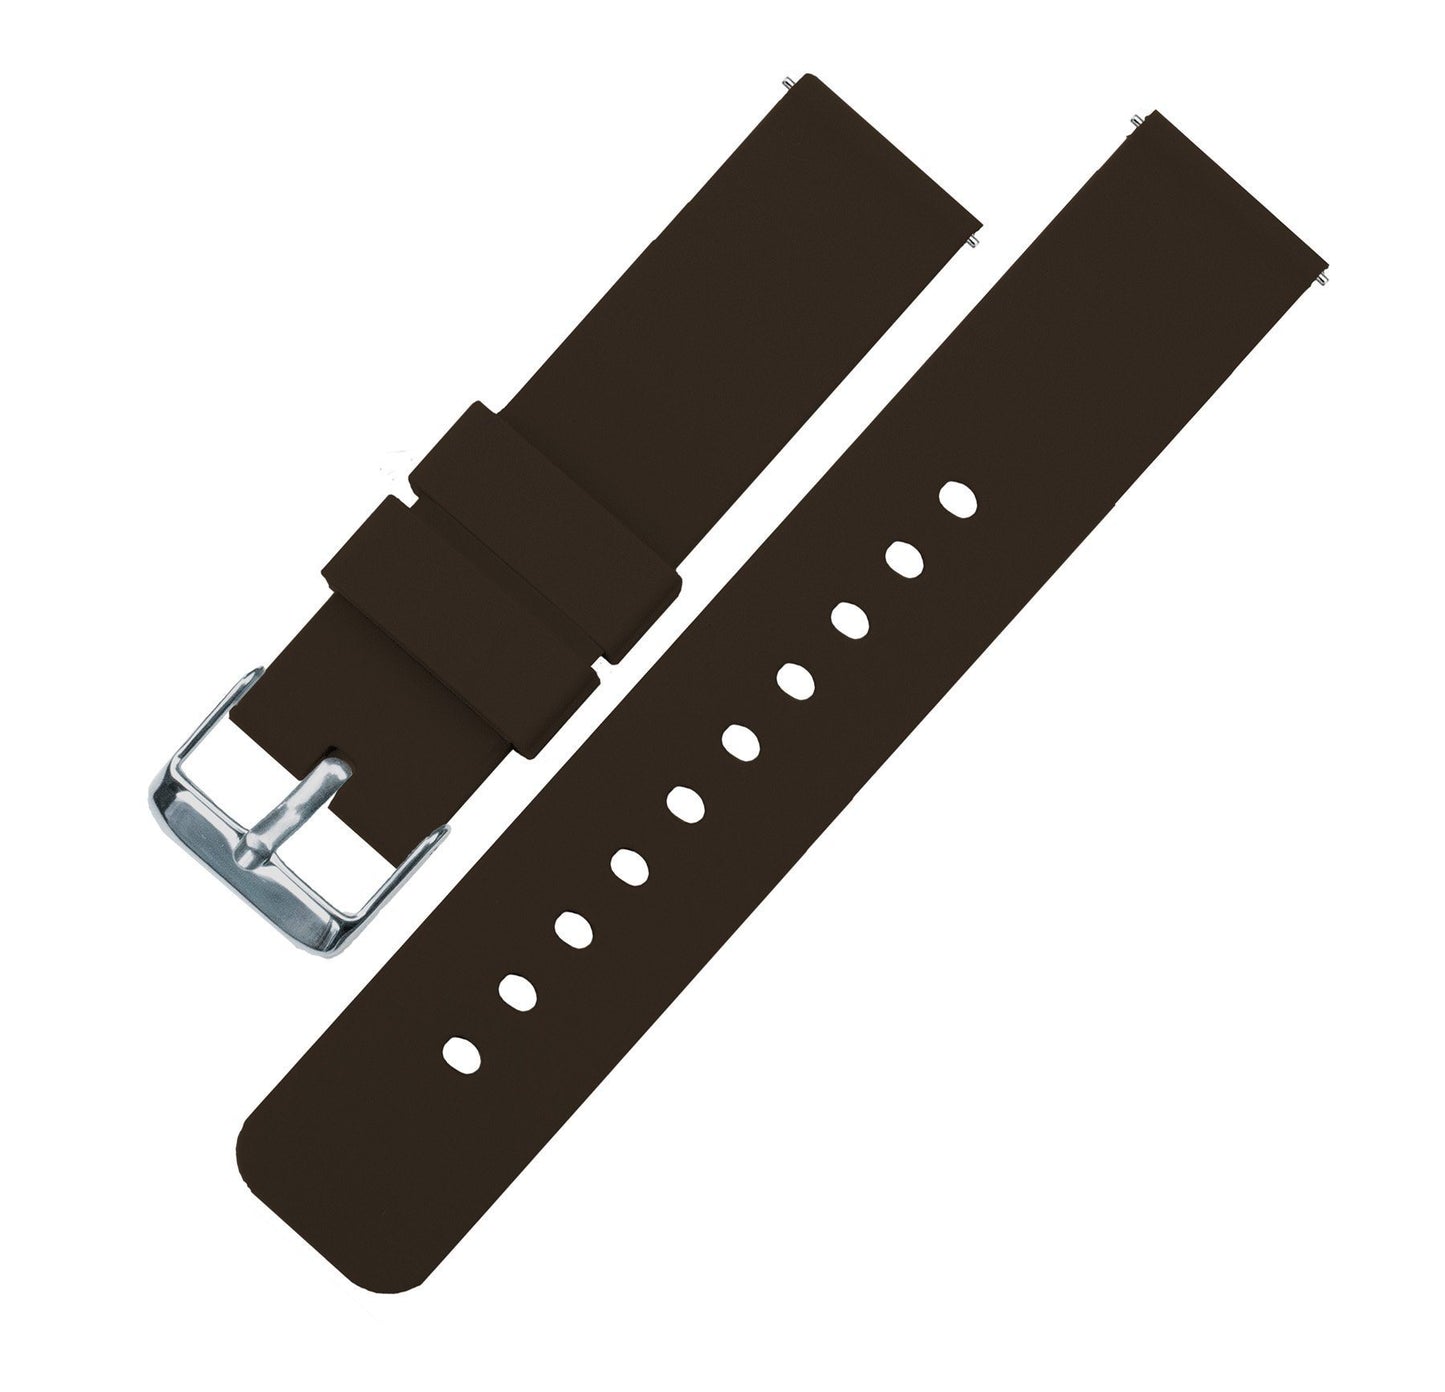 Withings Nokia Activité and Steel HR | Silicone | Chocolate Brown - Barton Watch Bands